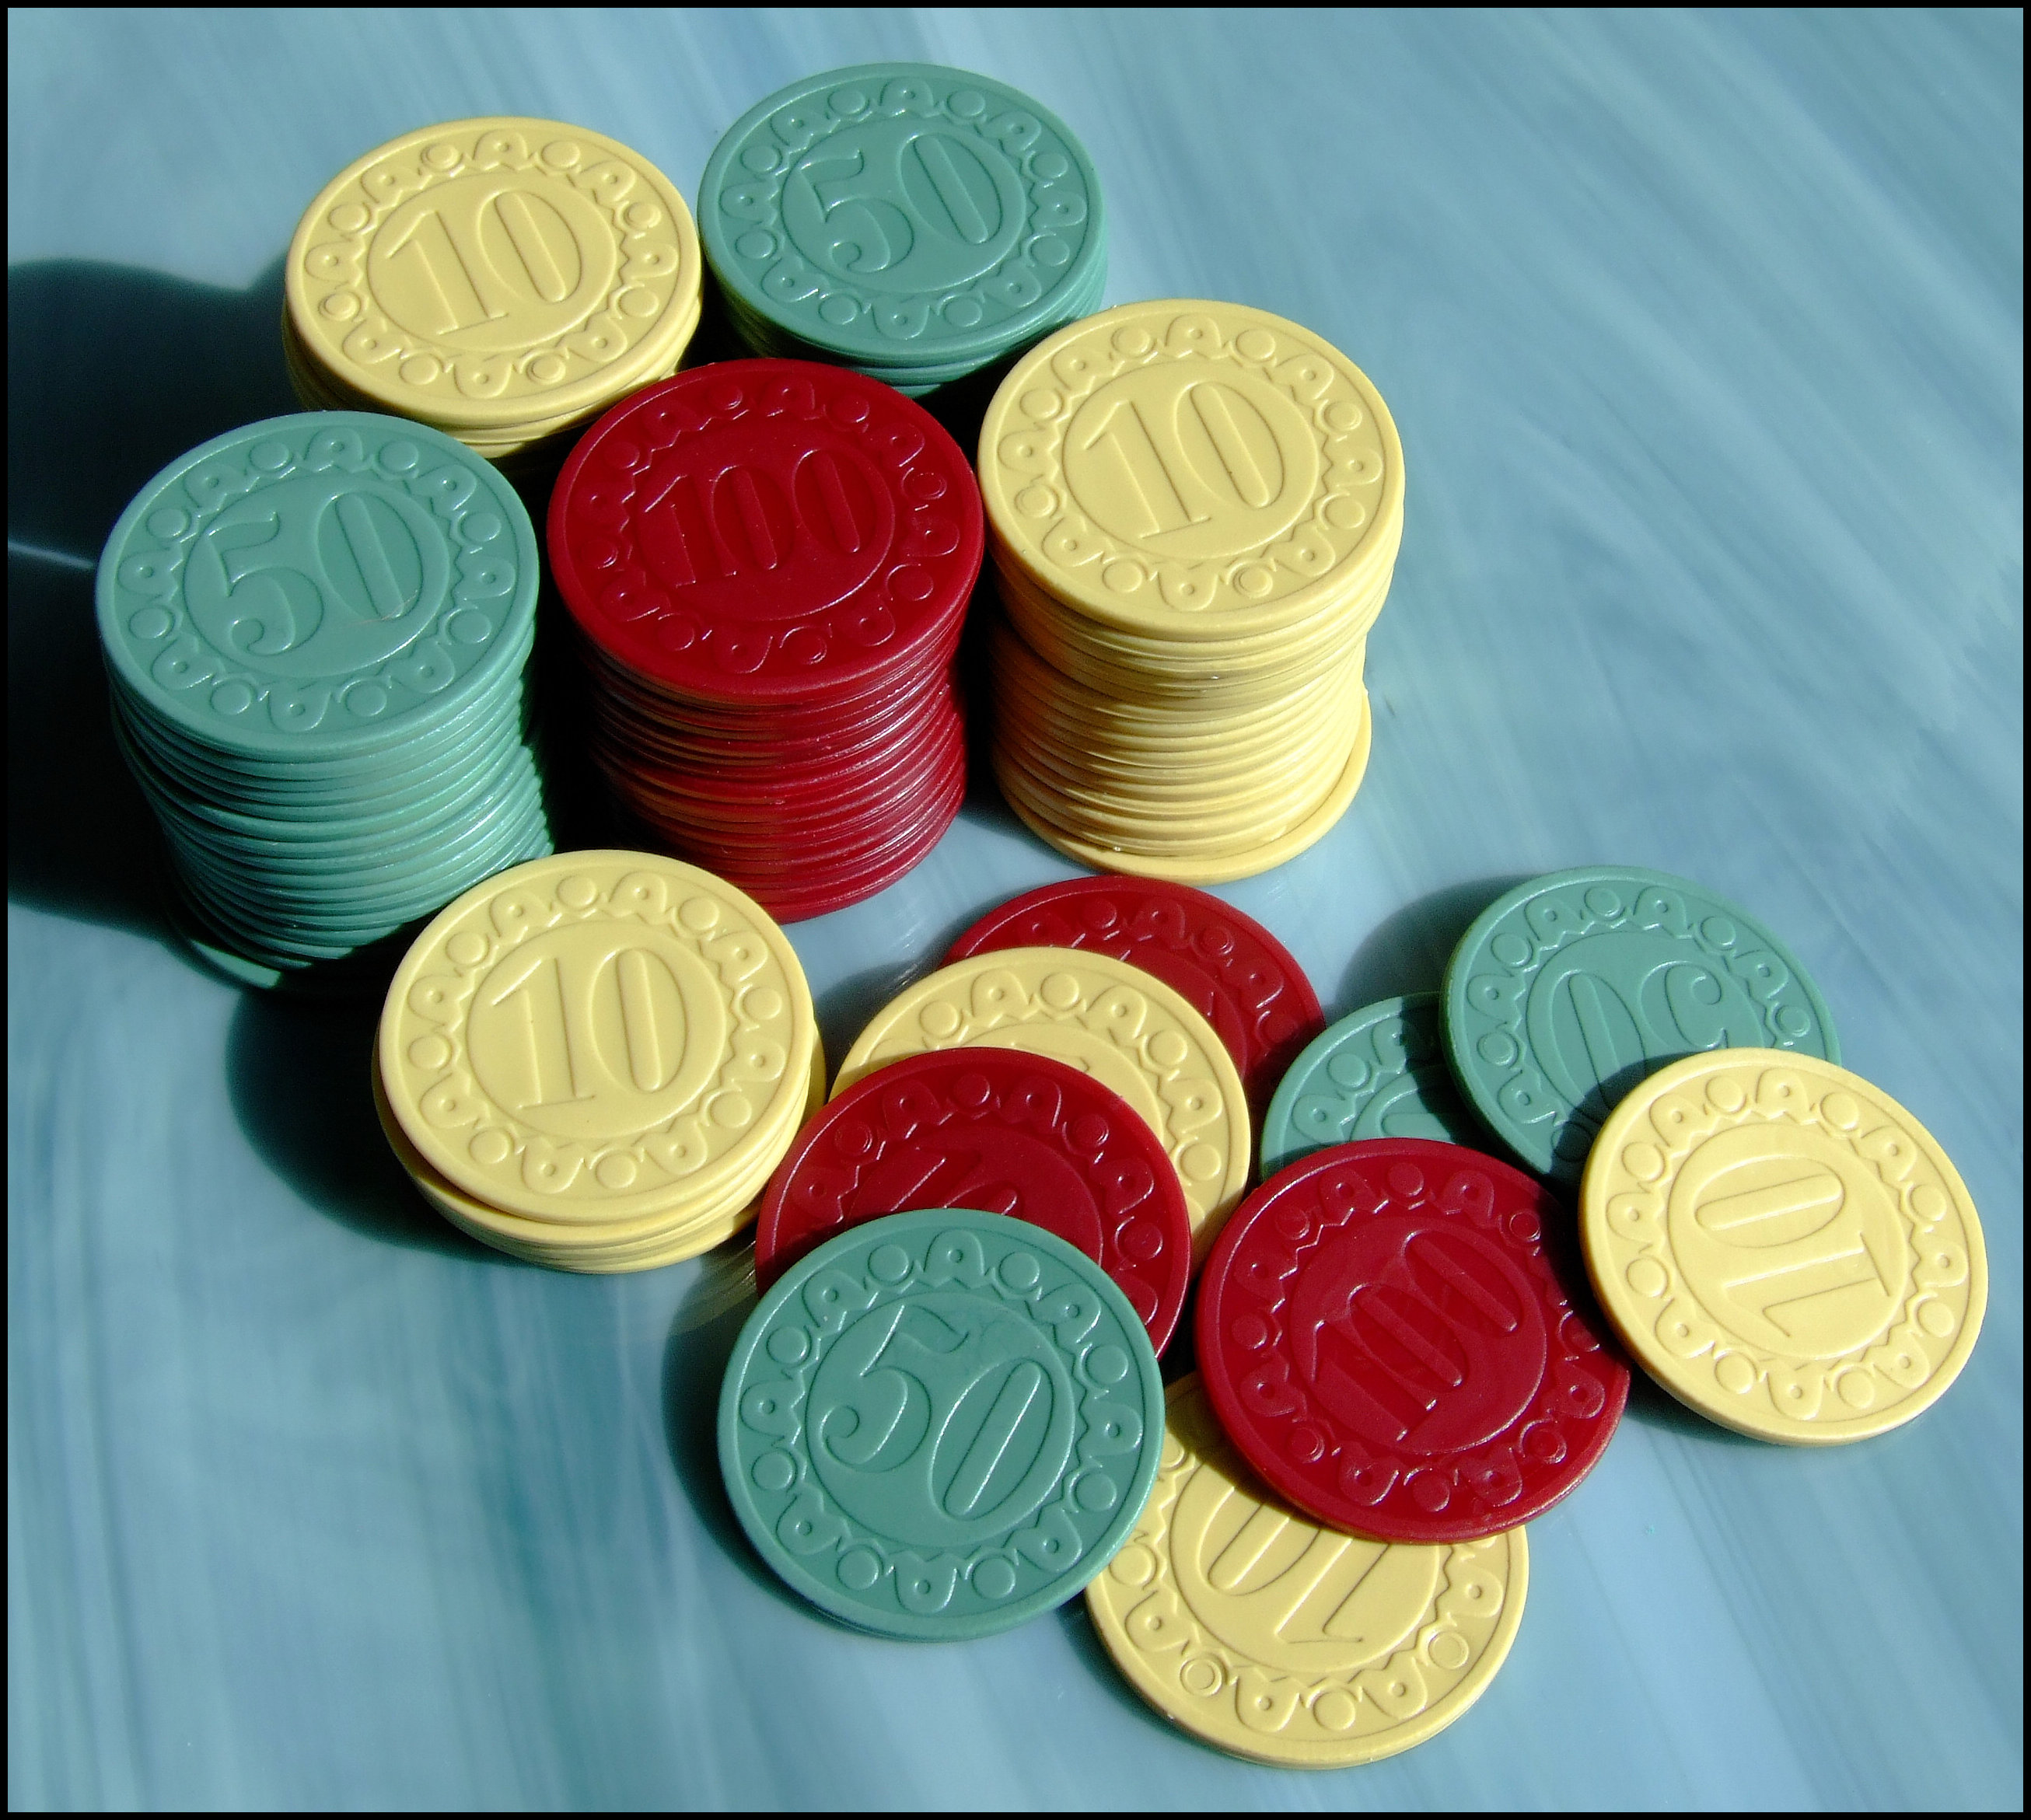 Head-To-Head Poker - Betting Chips